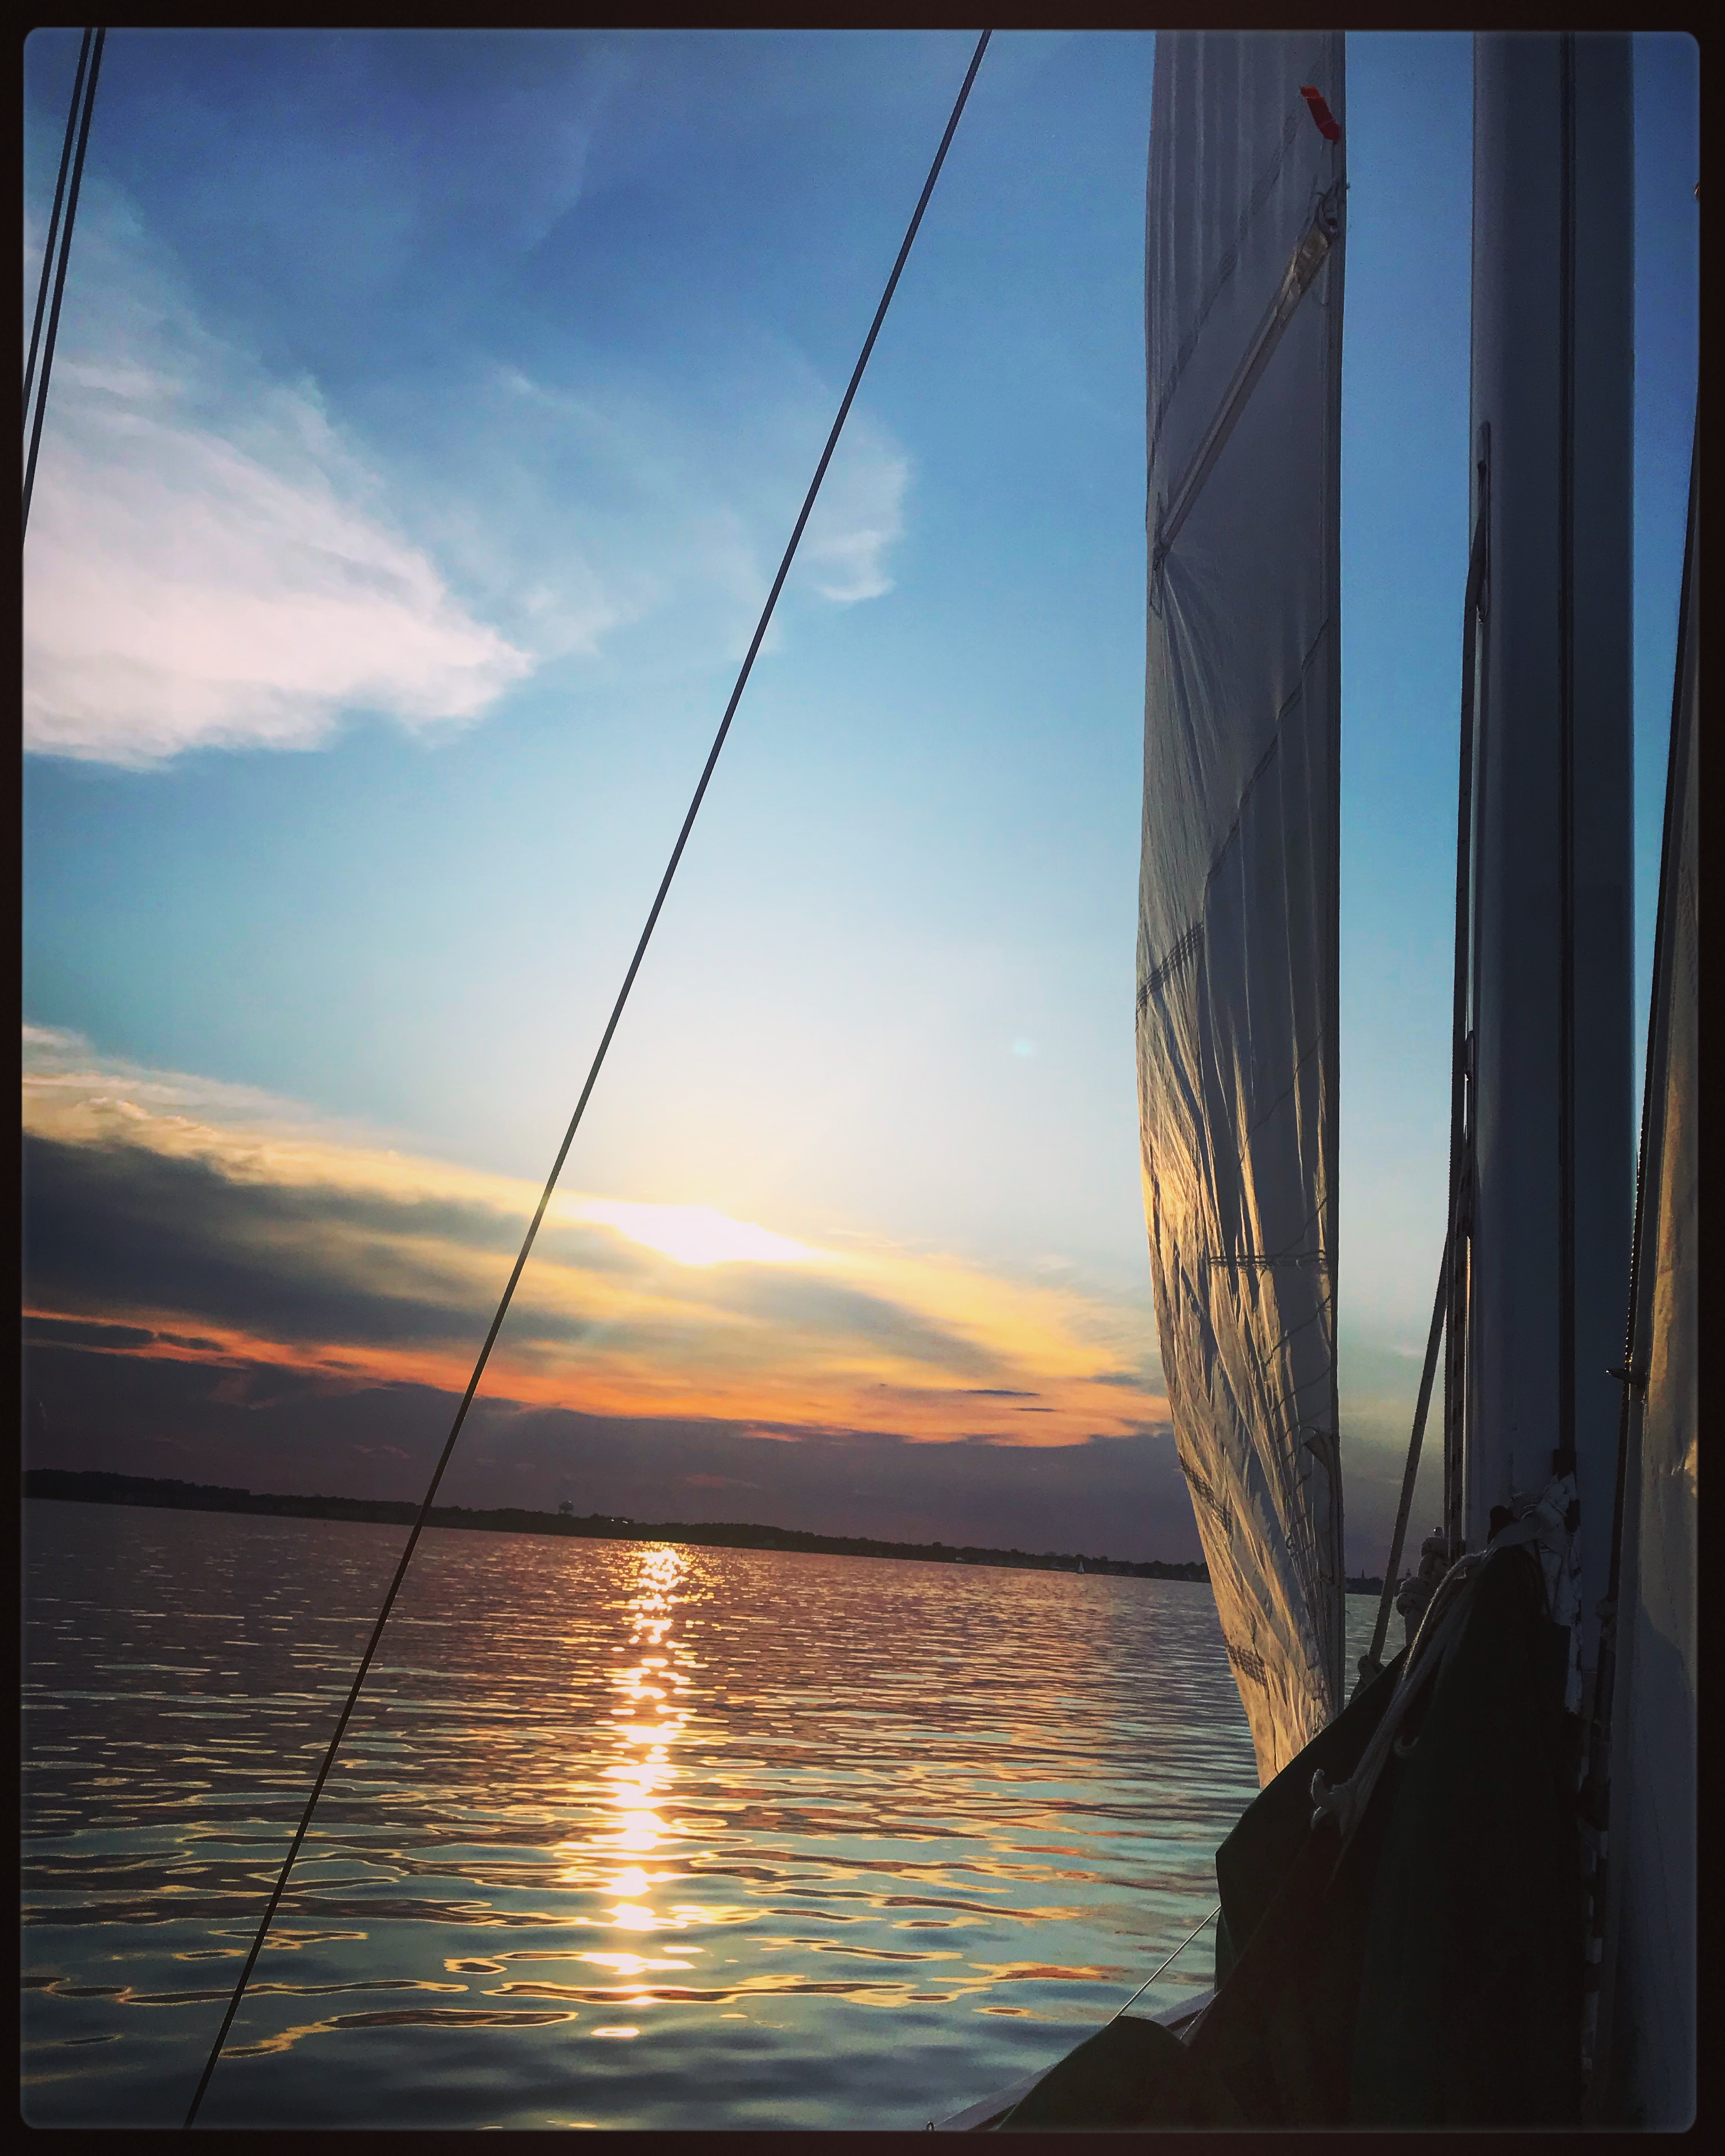 Sailing into the sunset with calm waters